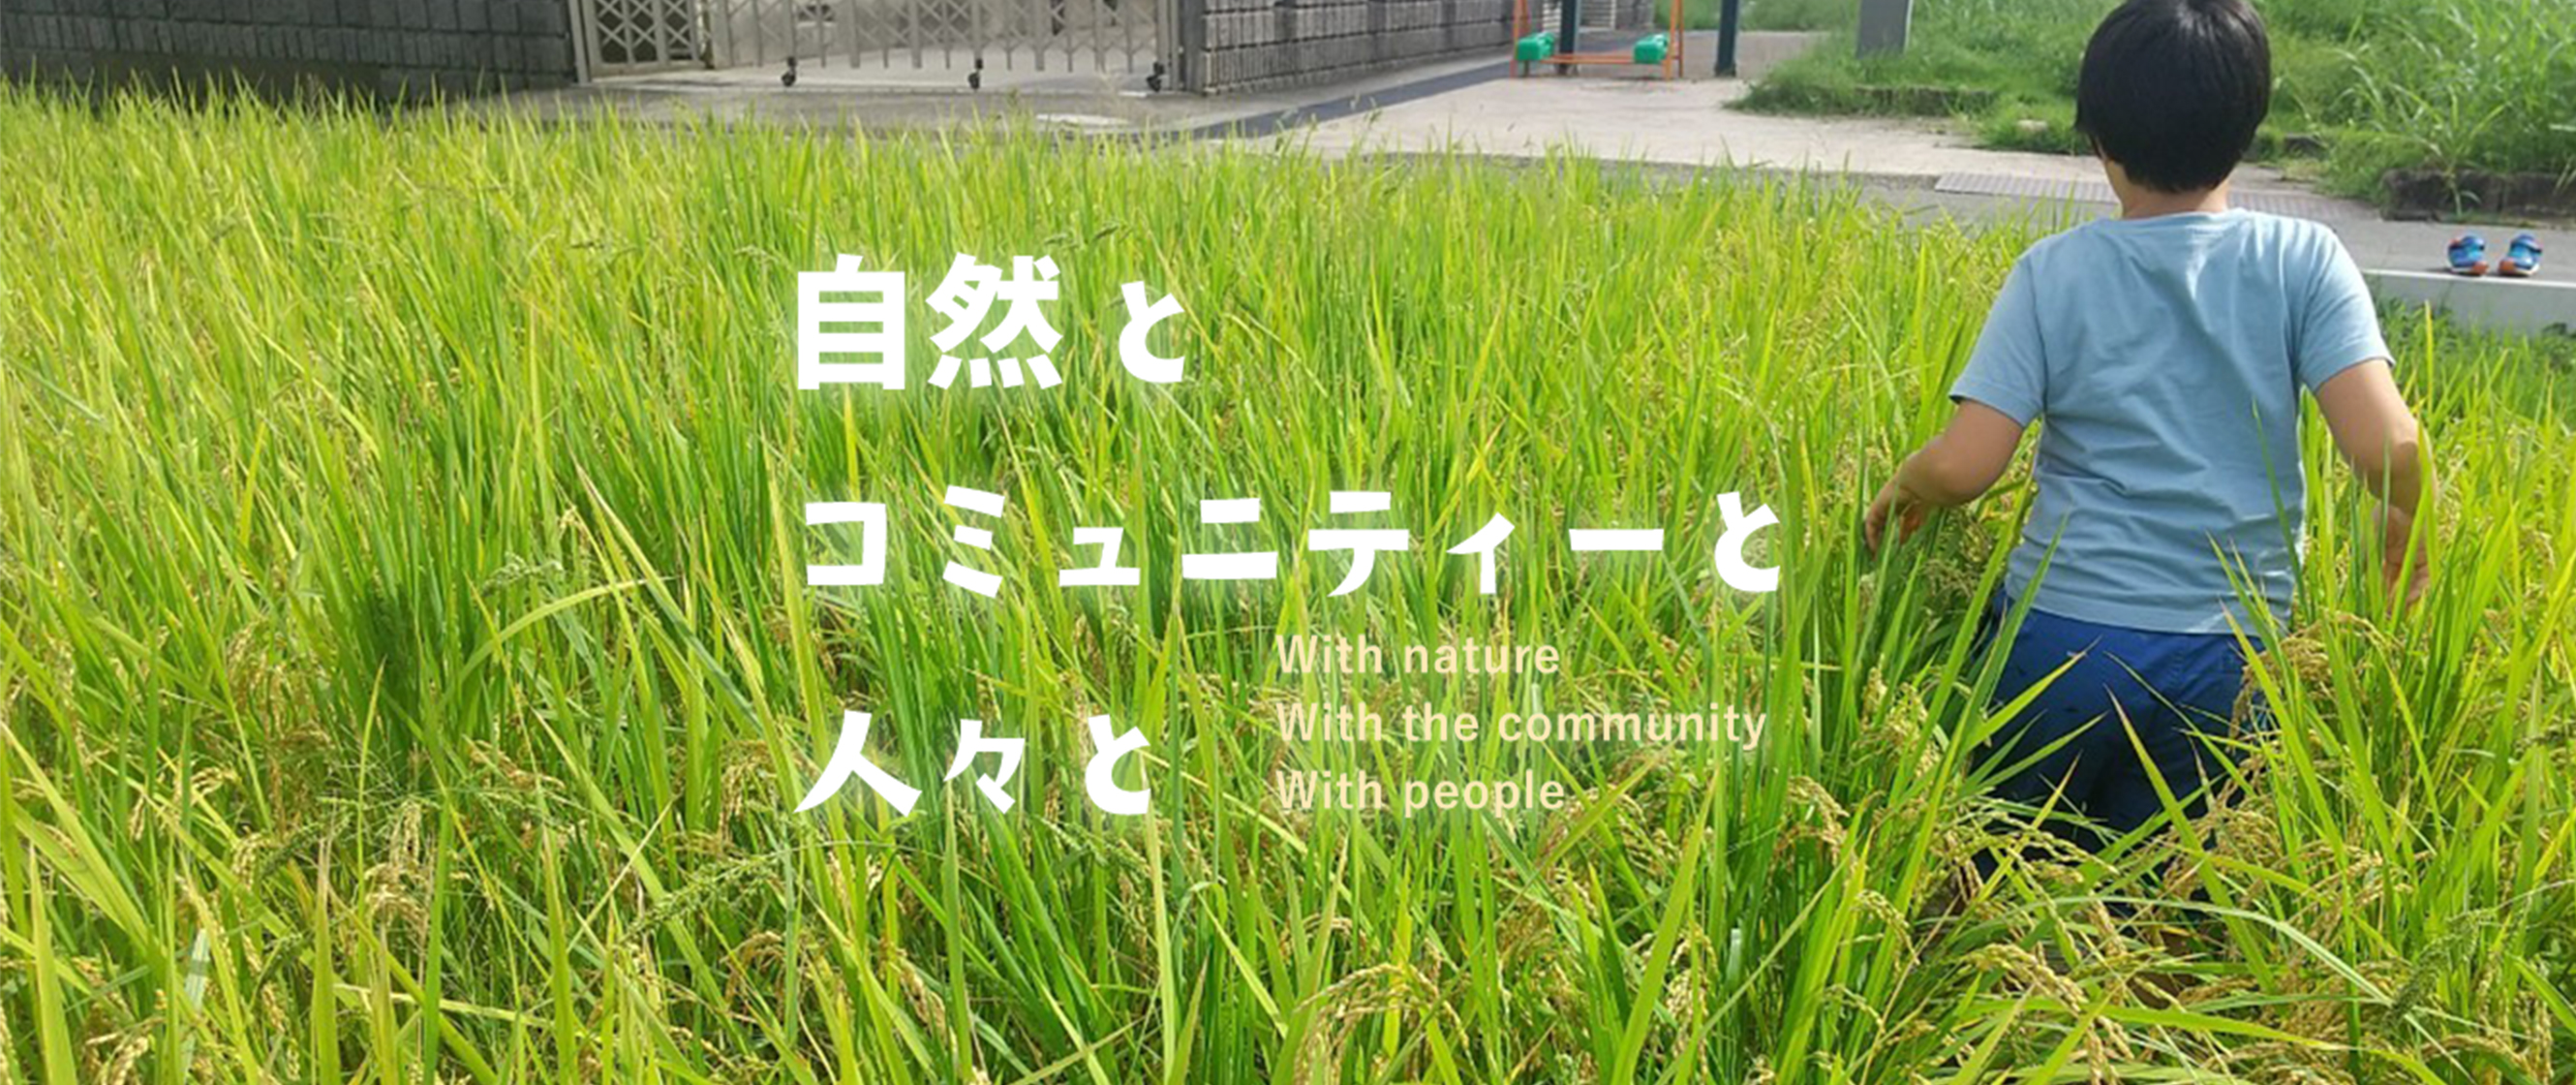 With nature 自然と　With the community コミュニティーと　With people 人々と